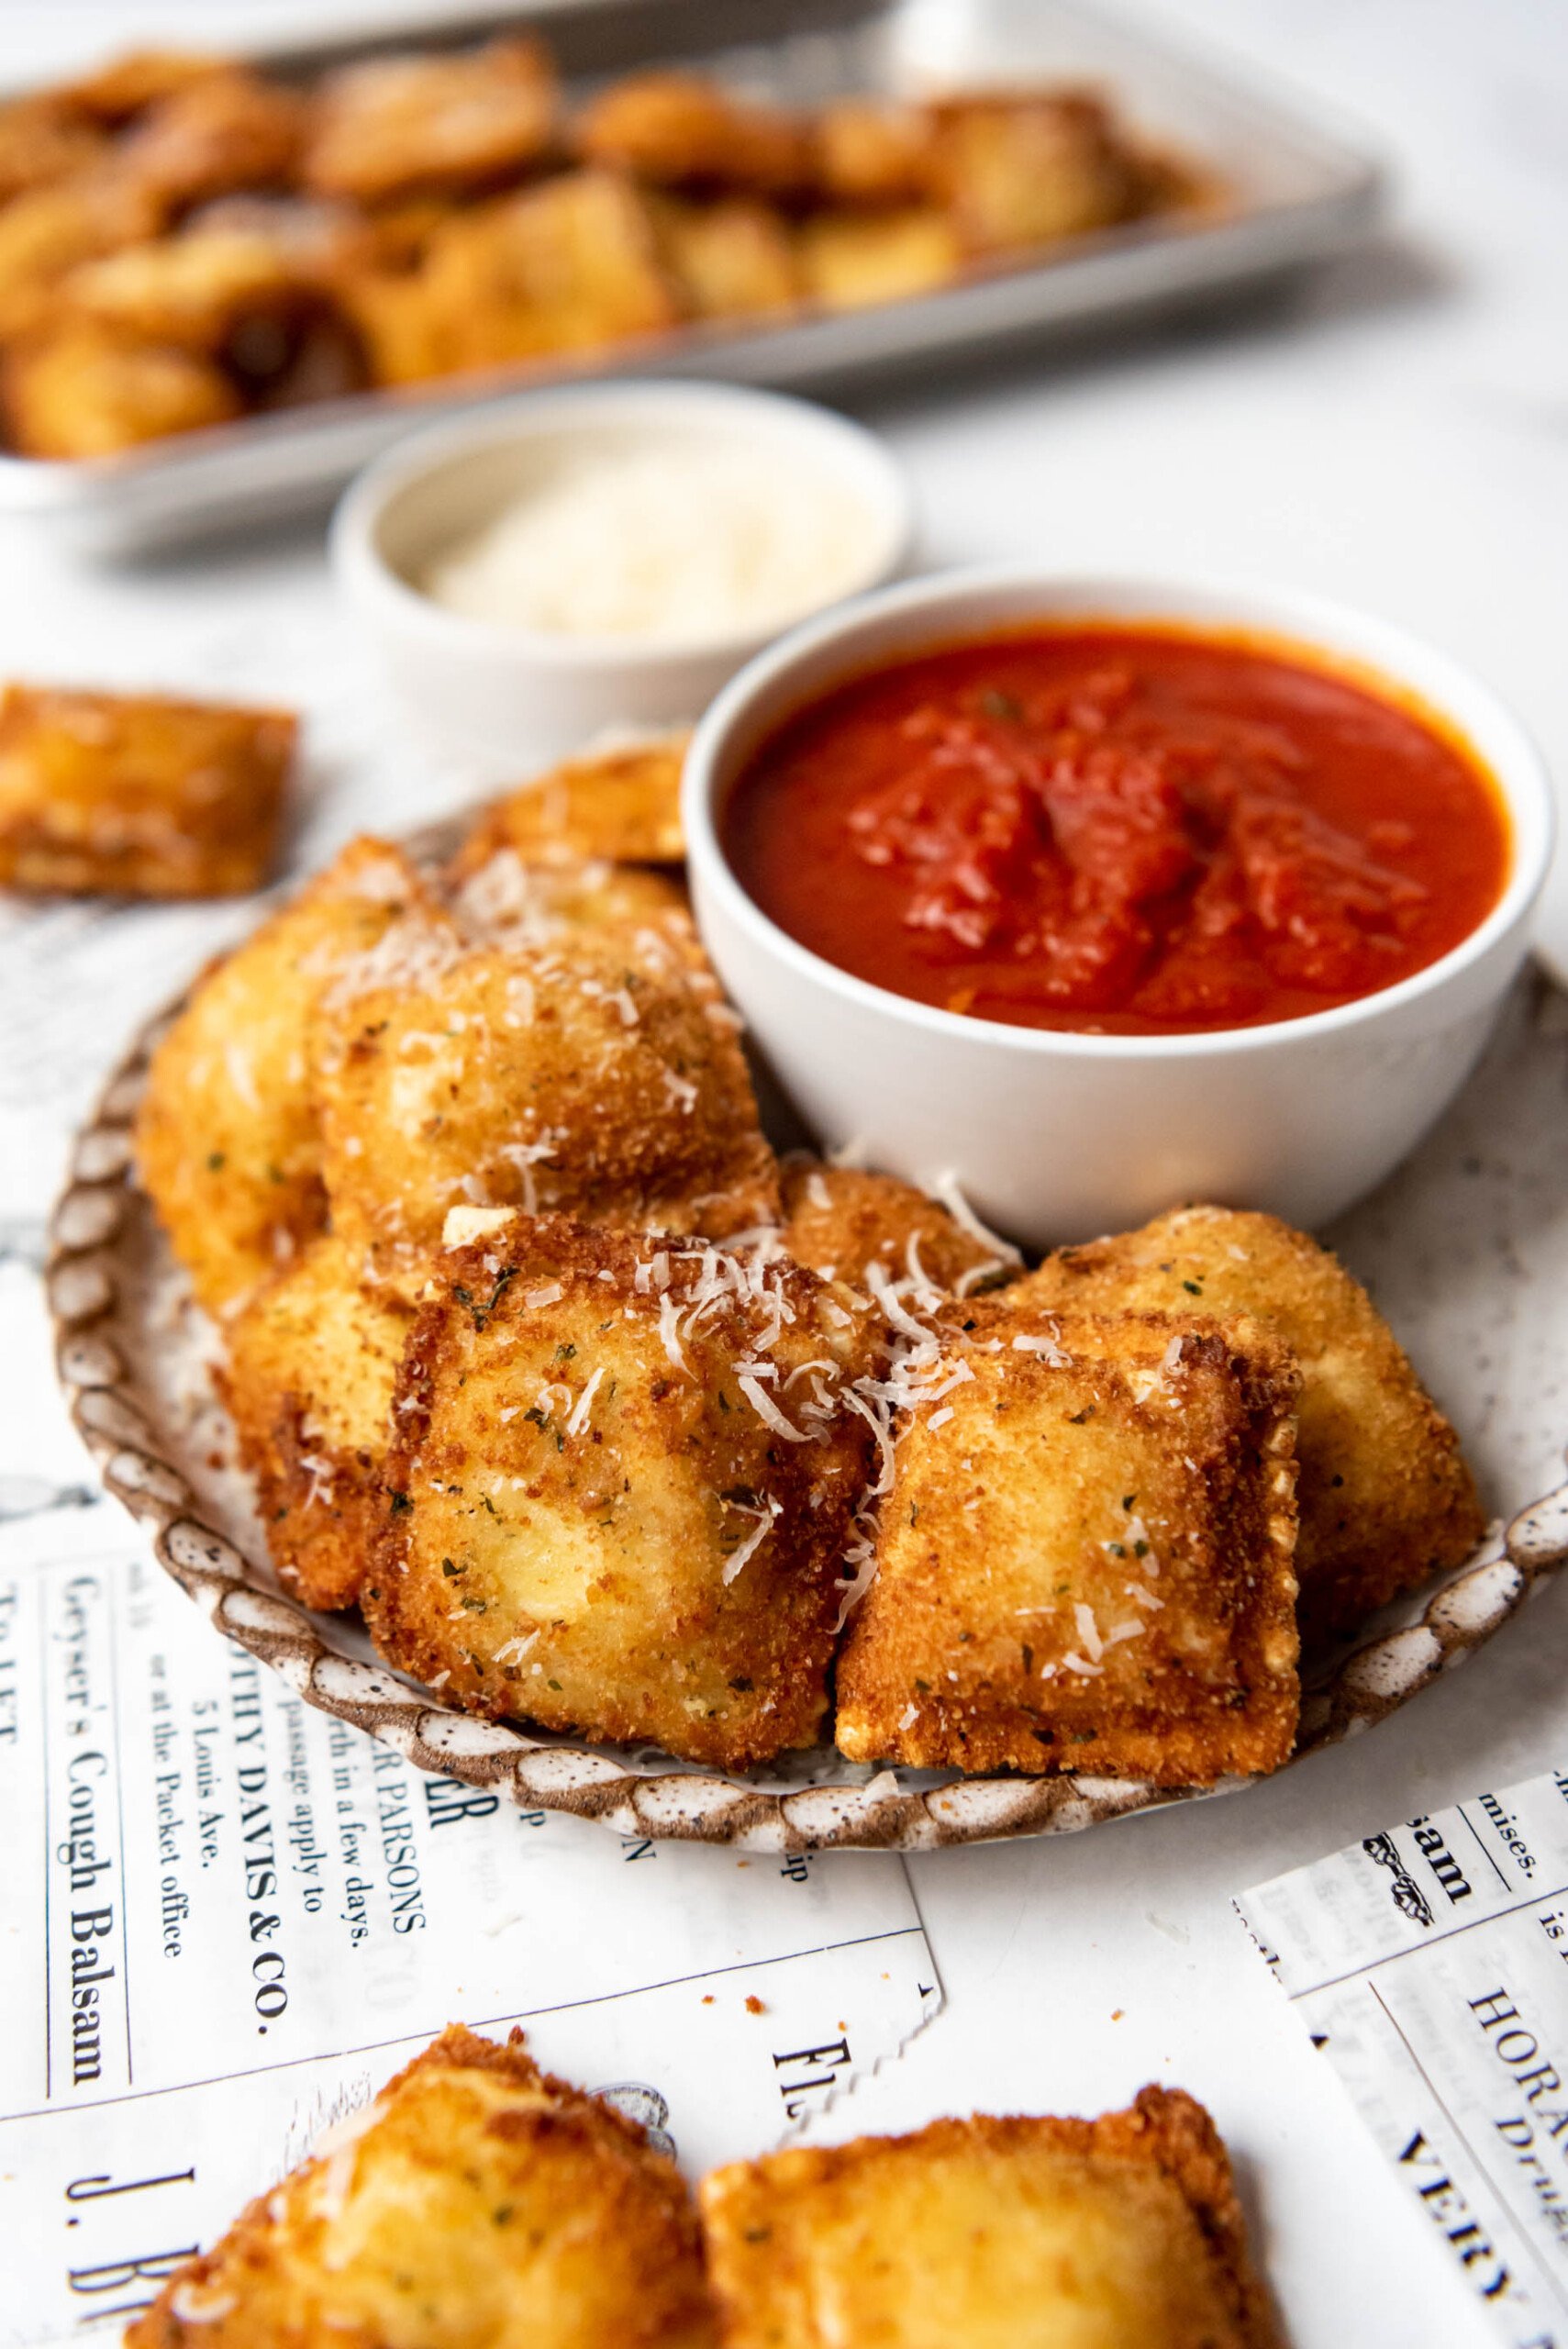 A plate of toasted ravioli with a bowl of marinara sauce for dipping.